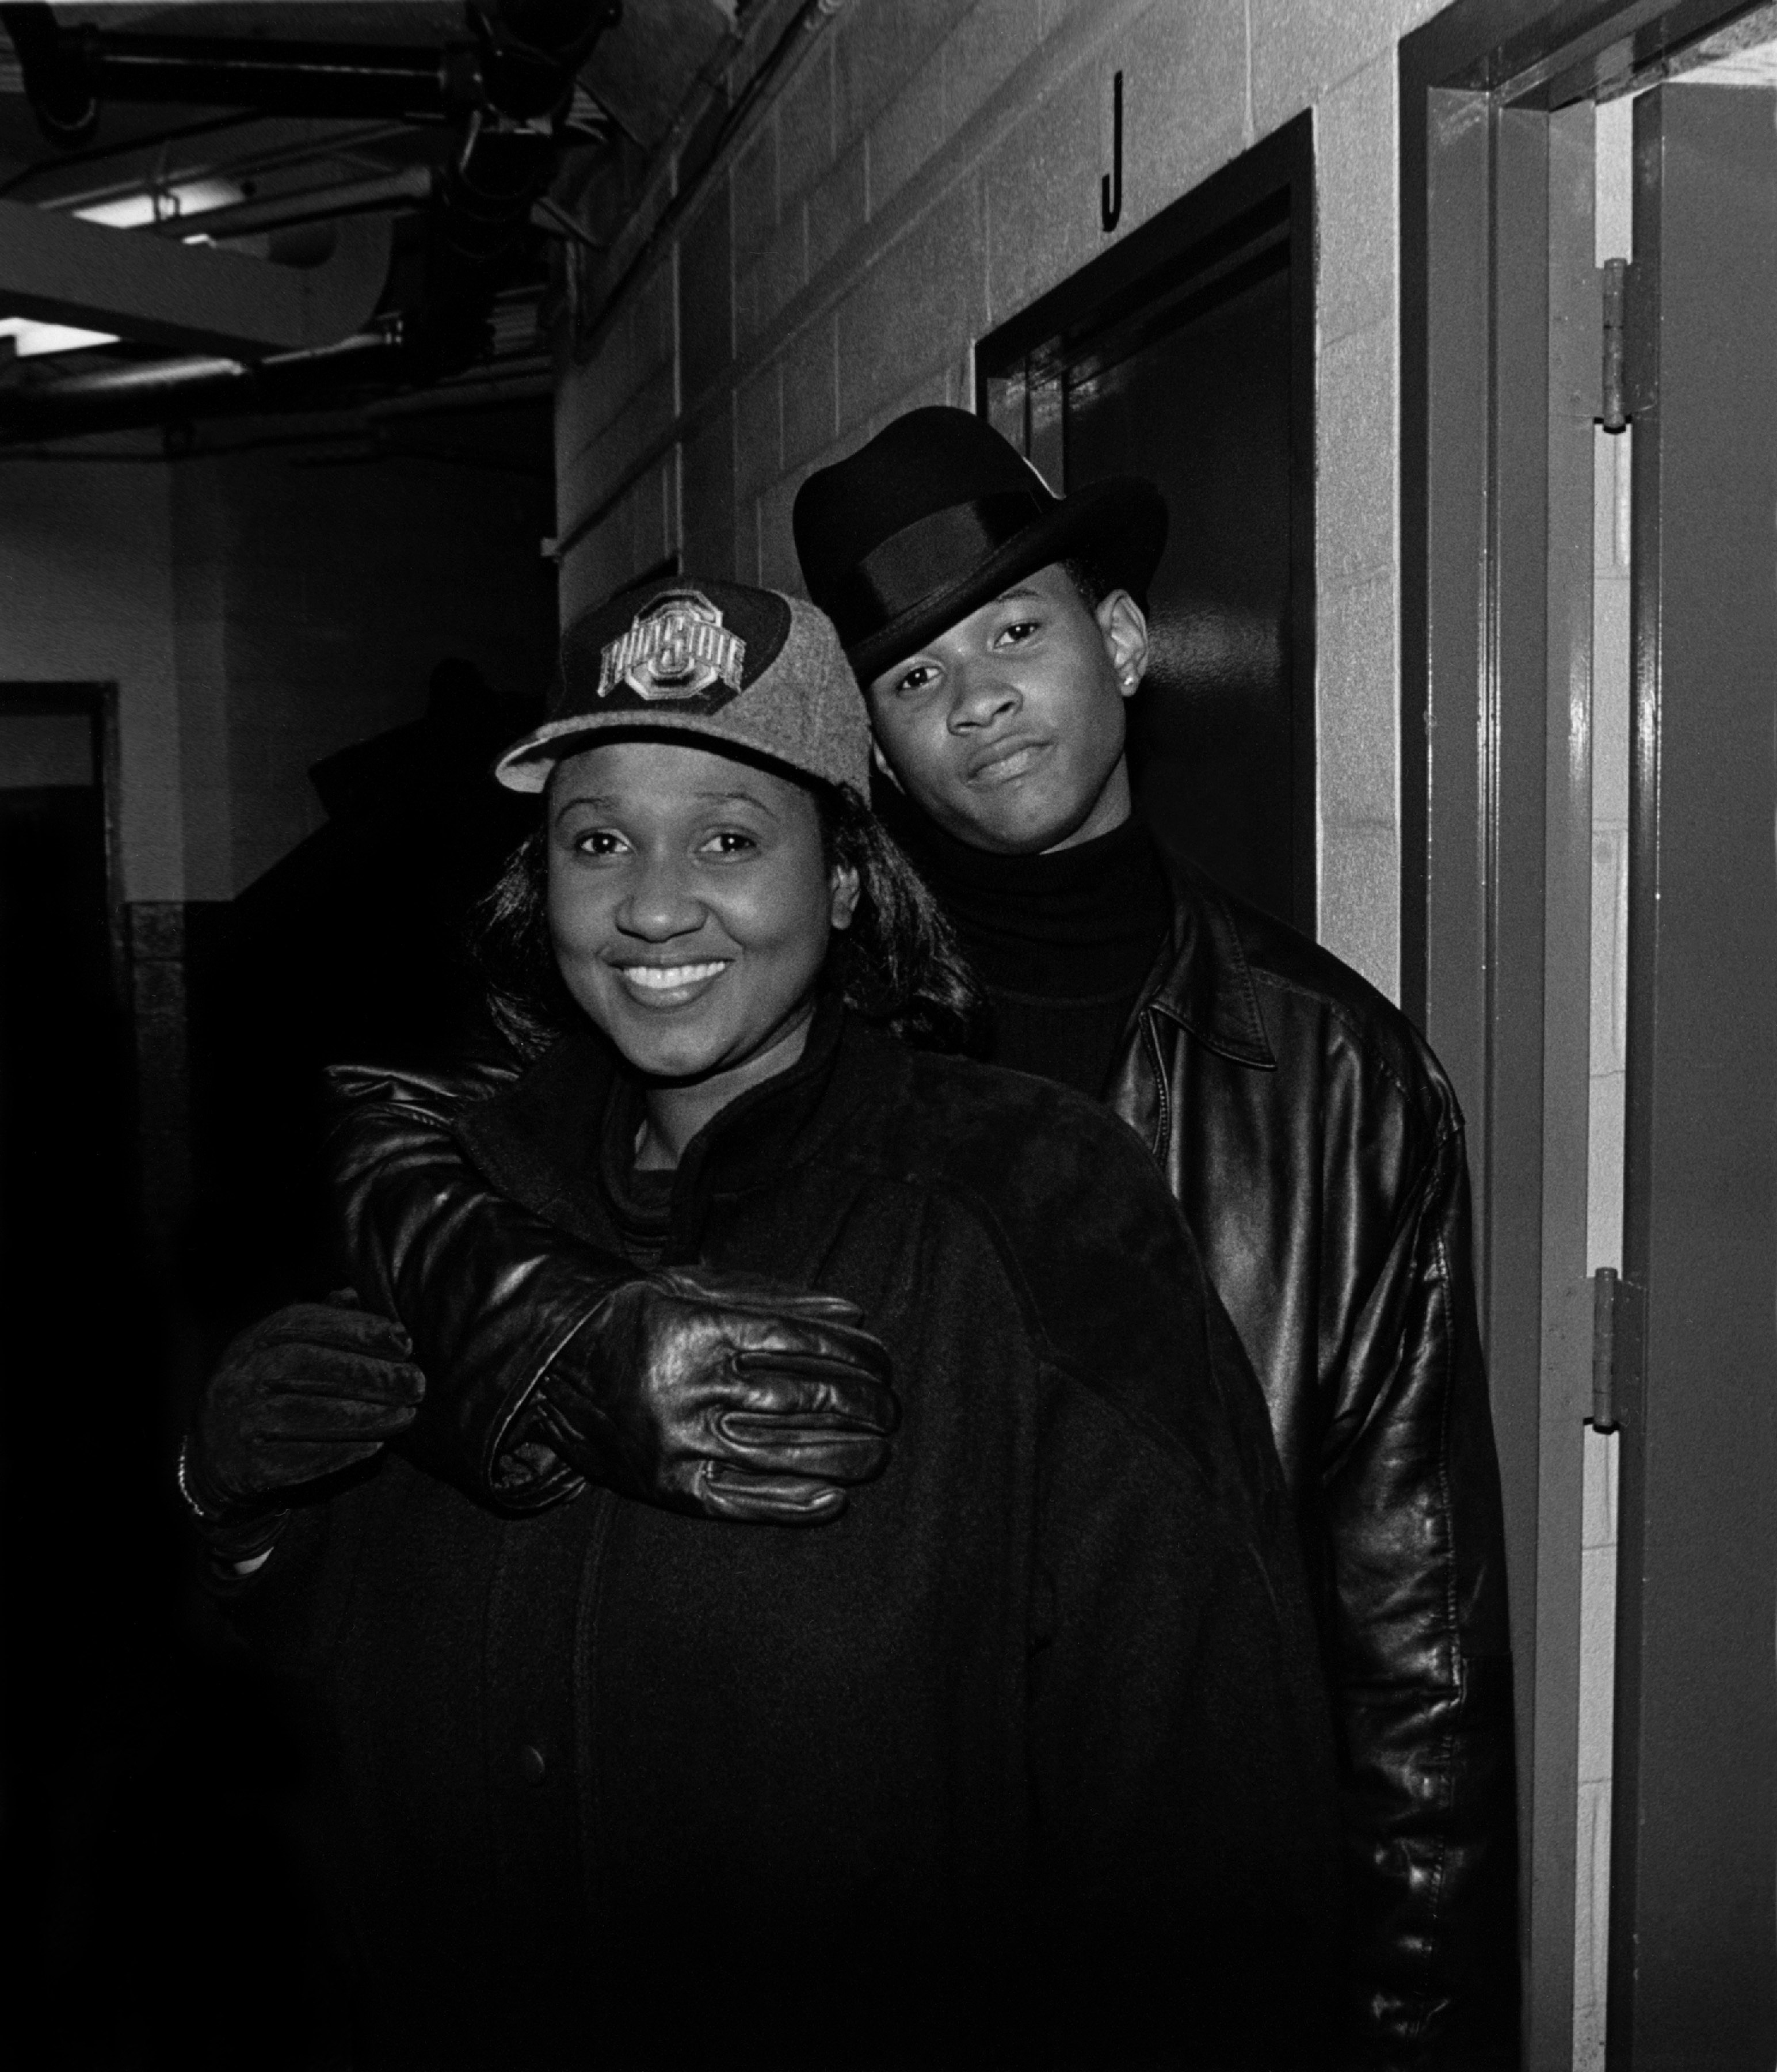 Jonnetta Patton and Usher posing for photos backstage at the U.I.C. Pavilion in Chicago, Illinois, in December 1994. | Source: Getty Images